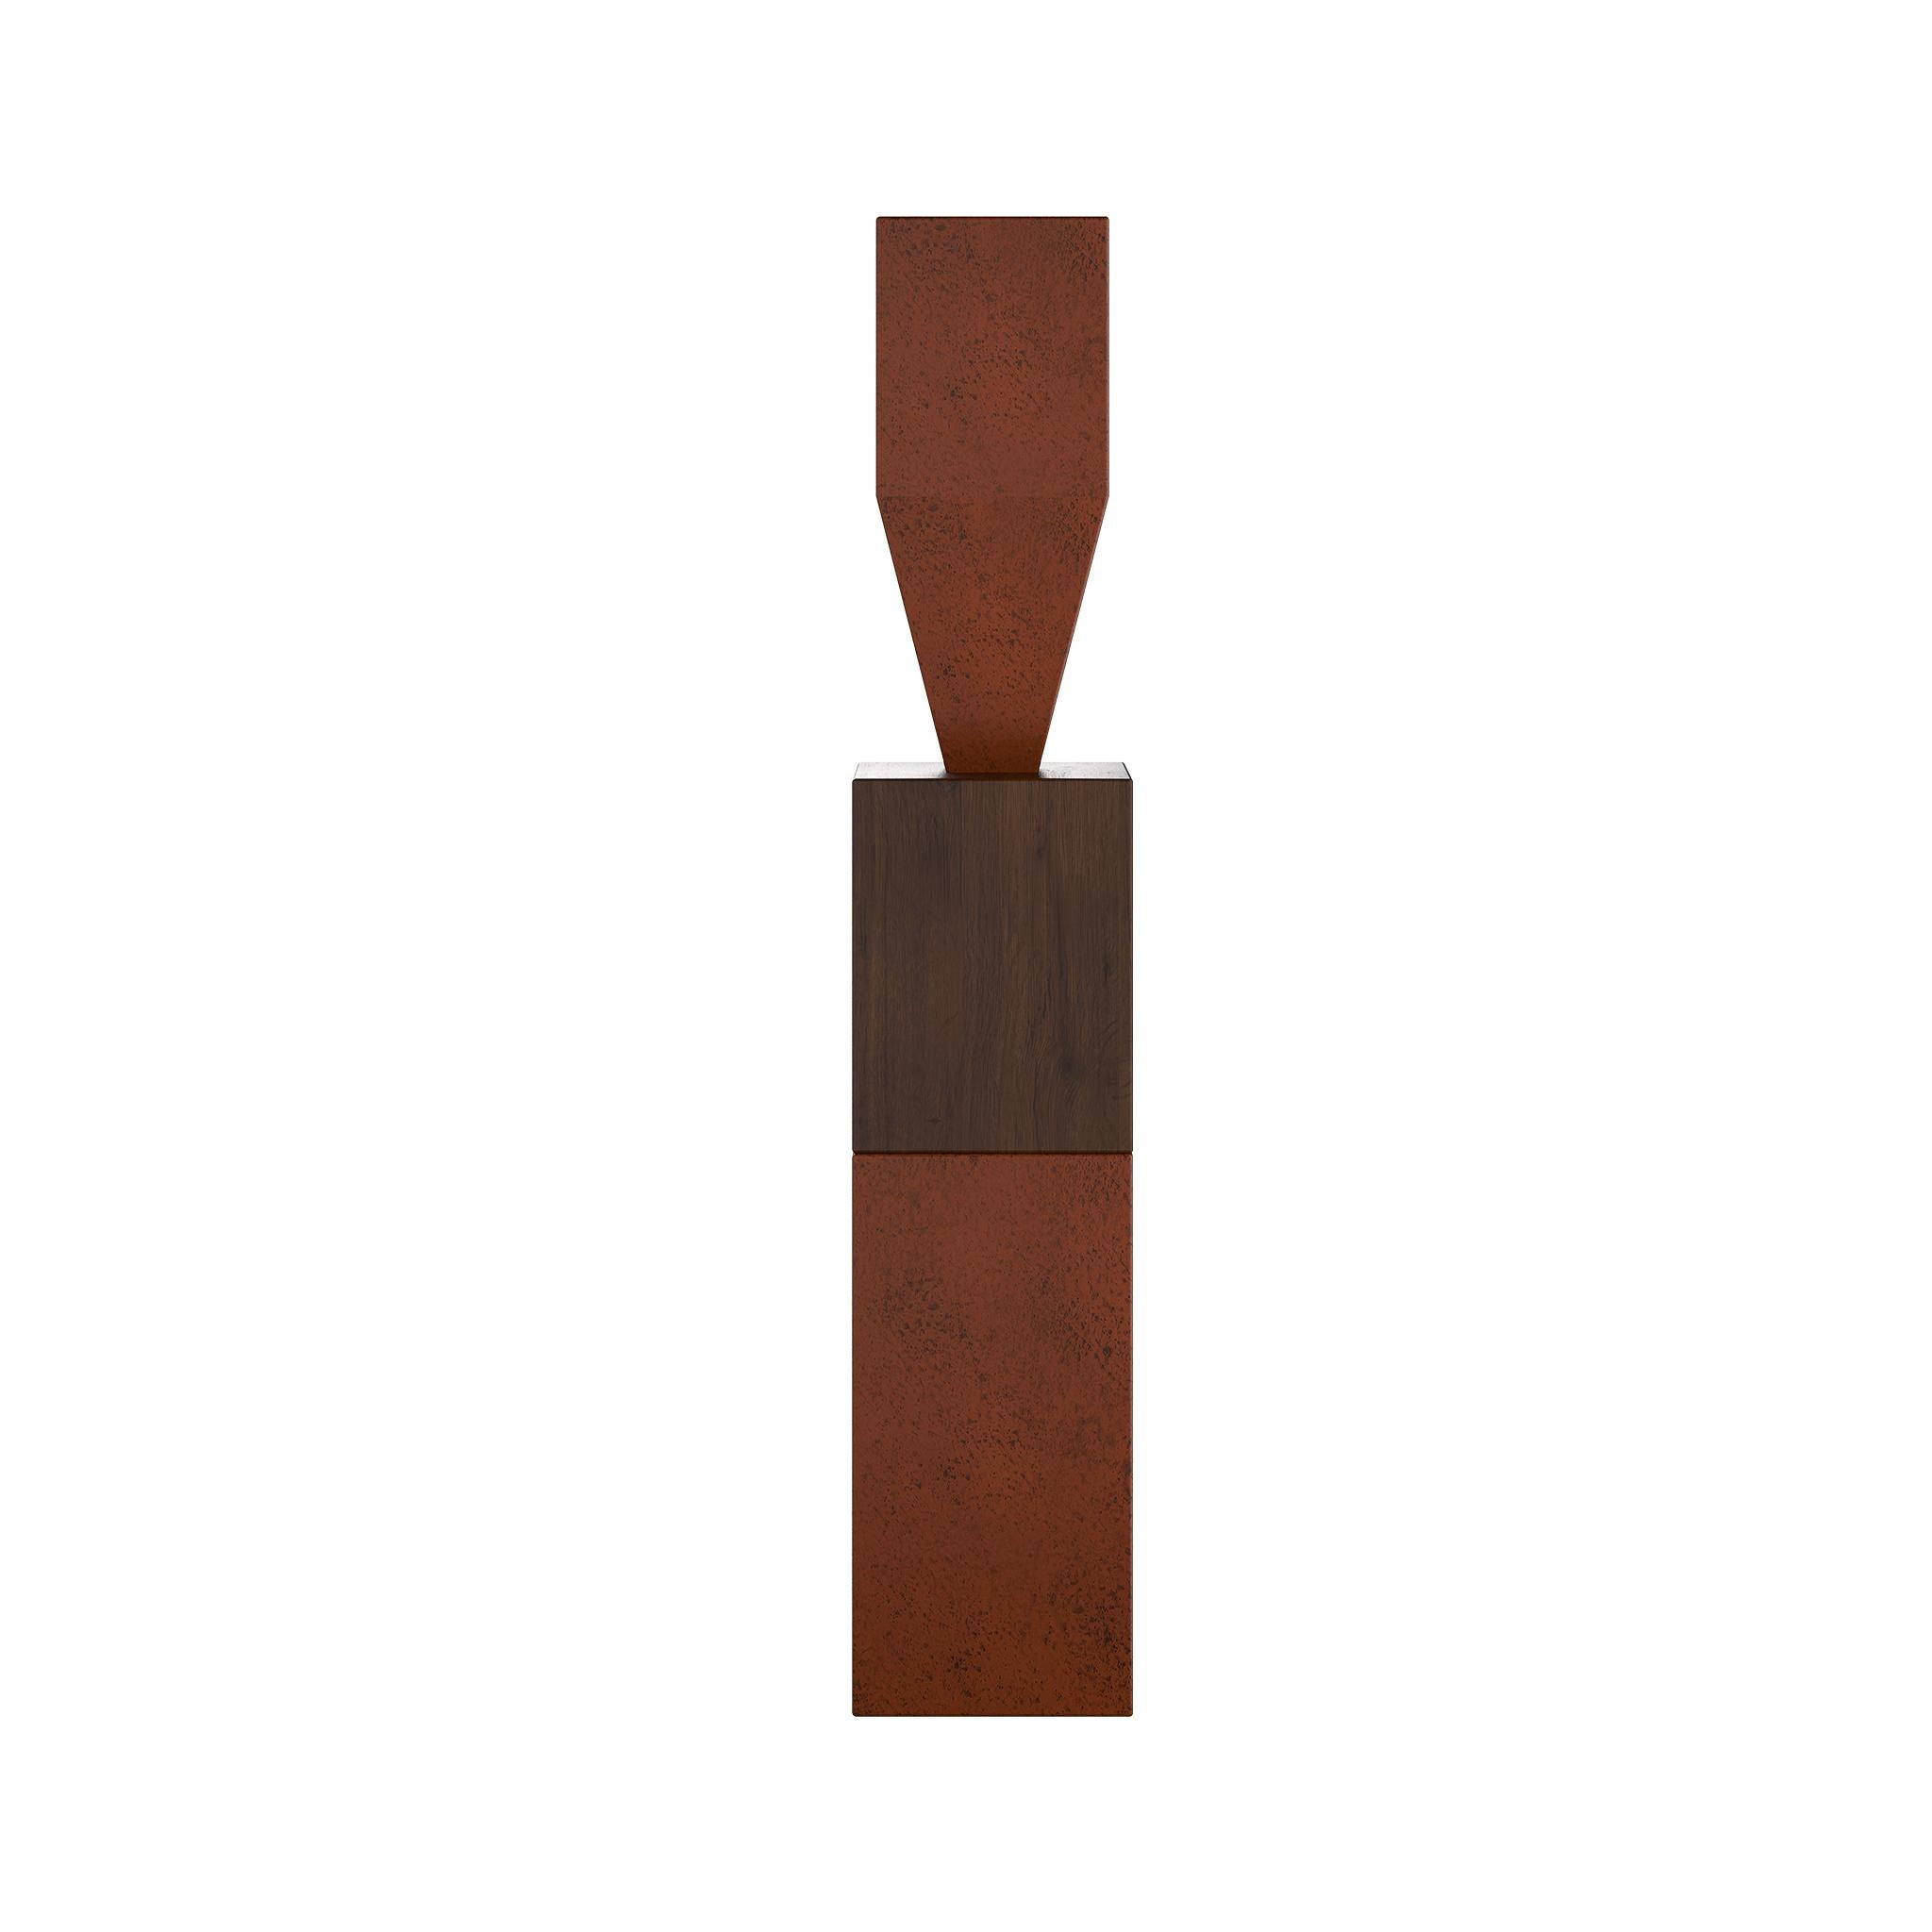 Contemporary Wood Geometric Totem Sculpture Pole in Oak Wood Rust Effect Lacquer